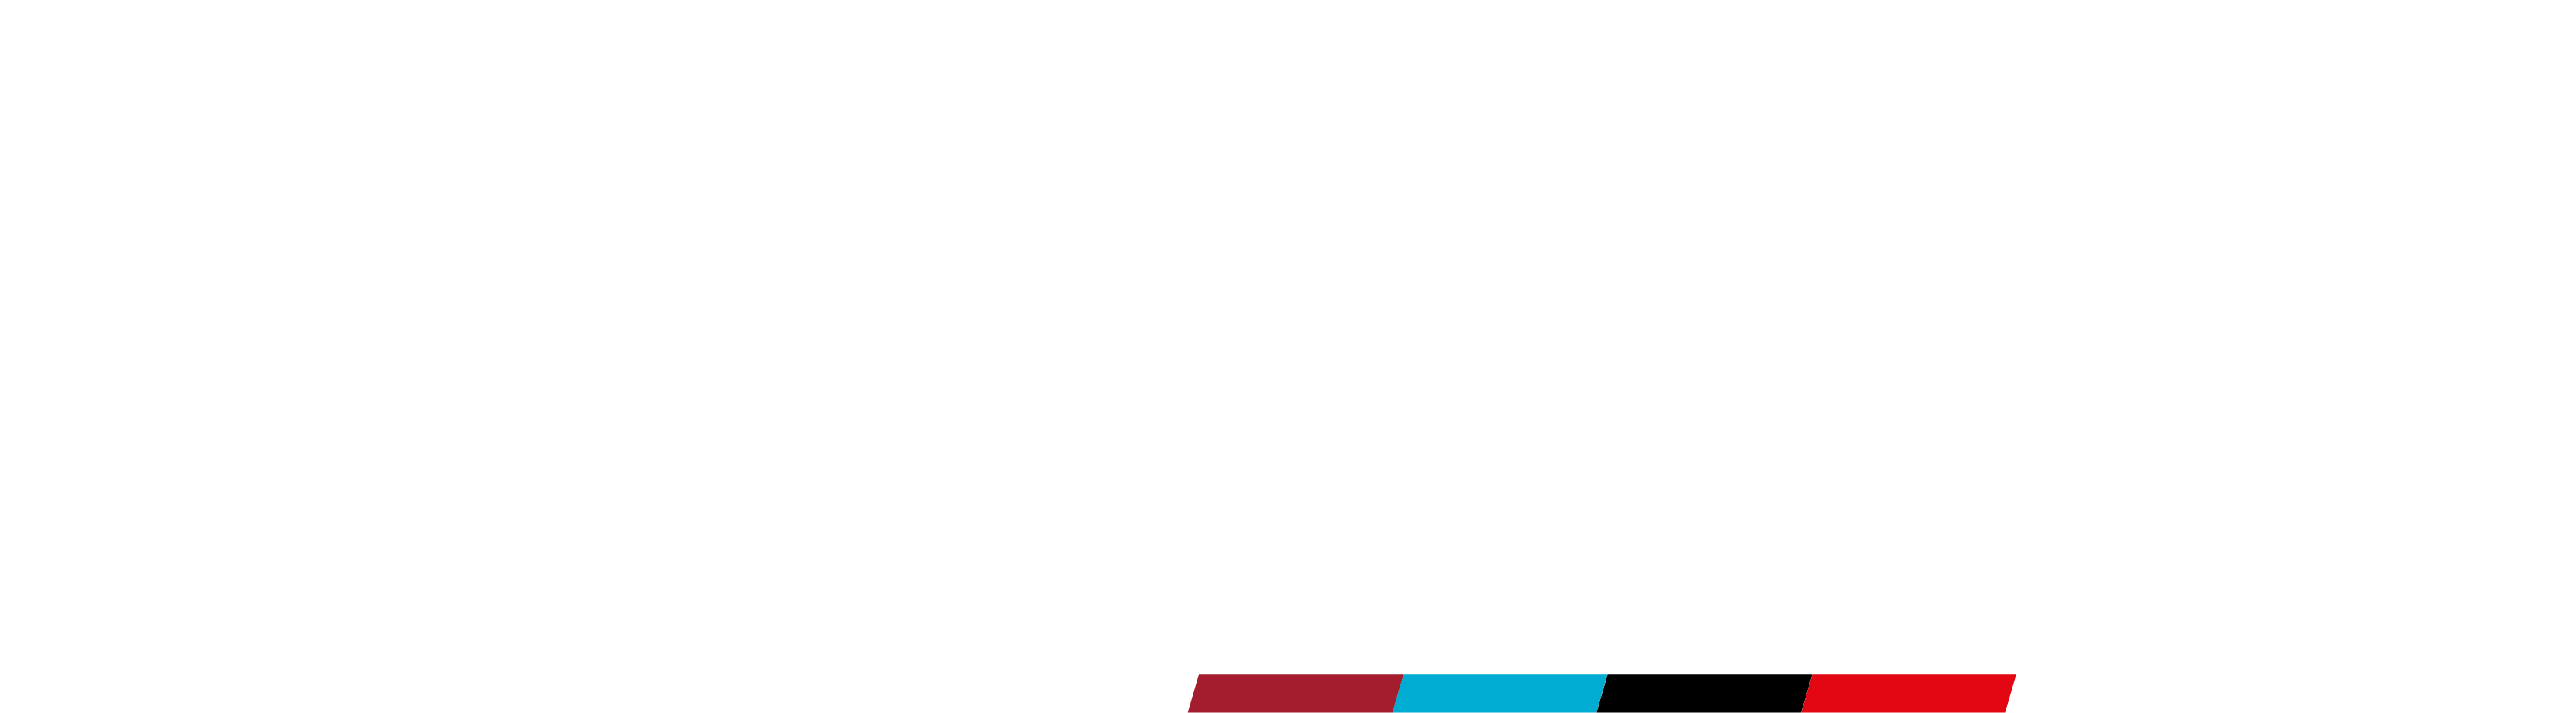 Lambro Rugby